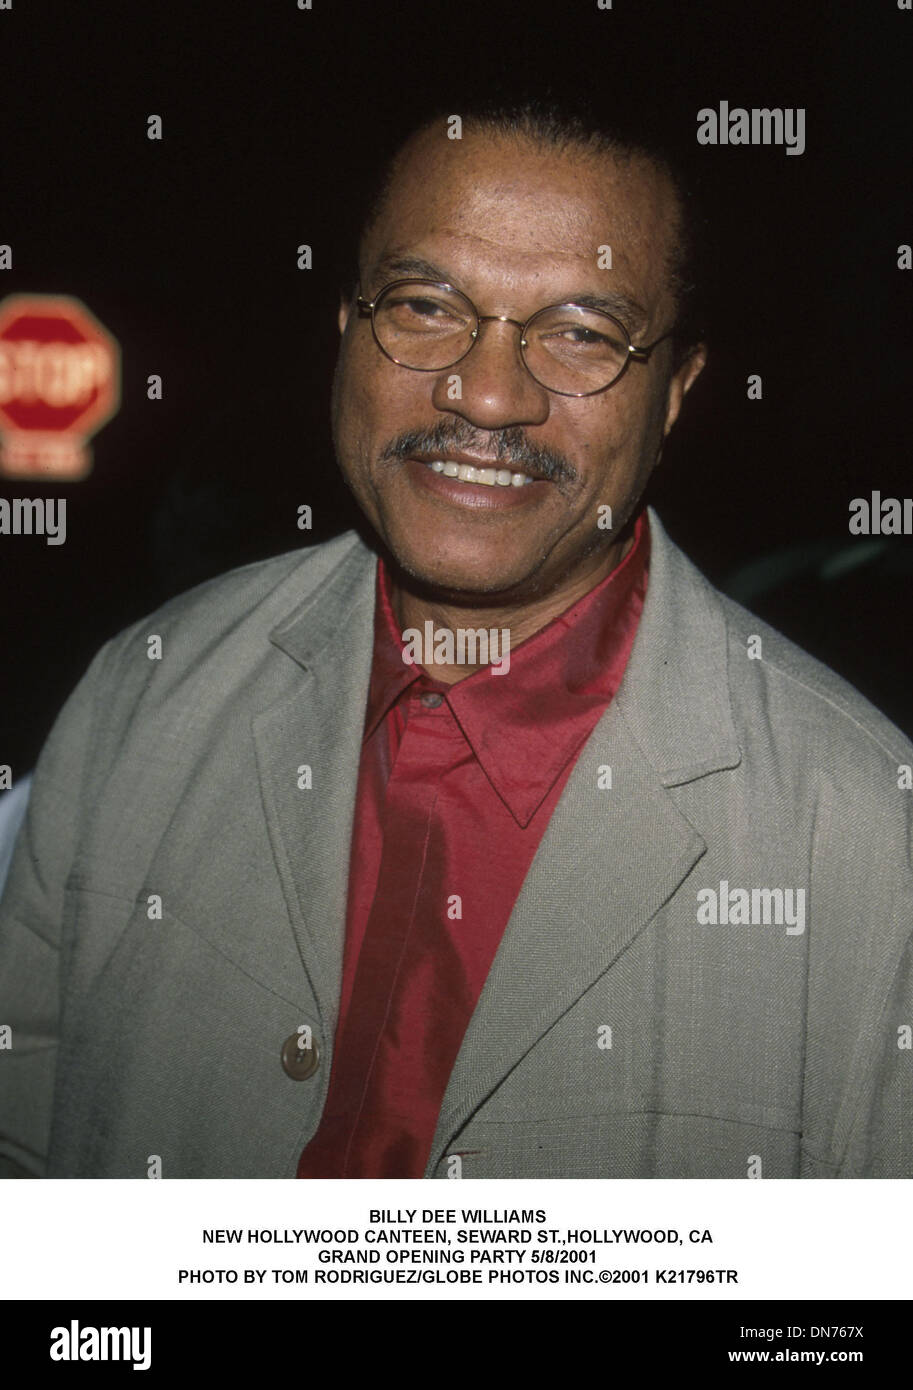 8 mai 2001 - Billy Dee Williams.NOUVEL HOLLYWOOD CANTEEN, SEWARD ST.,Hollywood, CA.Grand Opening Party 5/8/2001. TOM RODRIGUEZ/ 2001 K21796TR(Image Crédit : © Globe Photos/ZUMAPRESS.com) Banque D'Images